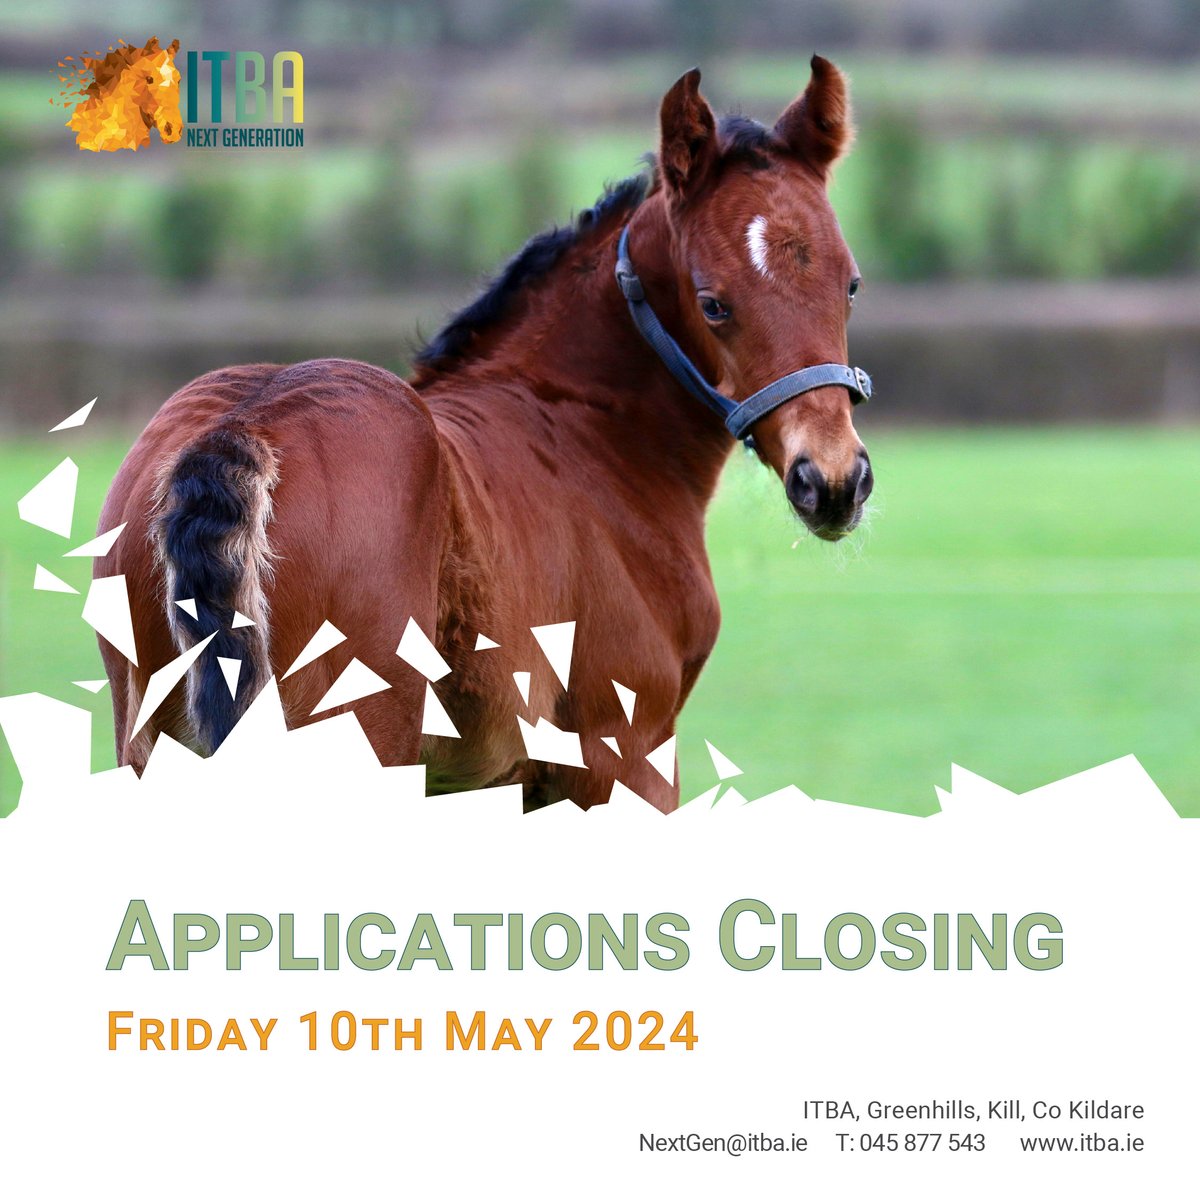 📢Applications Closing Tomorrow
 Friday 10th May 2024

Looking for placements and work experience with stud farms and Irish thoroughbred businesses? Apply for the 𝐈𝐓𝐁𝐀 𝐍𝐞𝐱𝐭 𝐆𝐞𝐧𝐞𝐫𝐚𝐭𝐢𝐨𝐧 𝐈𝐧𝐭𝐞𝐫𝐧𝐬𝐡𝐢𝐩 𝐒𝐜𝐡𝐞𝐦𝐞 today!

👉Application forms available at…